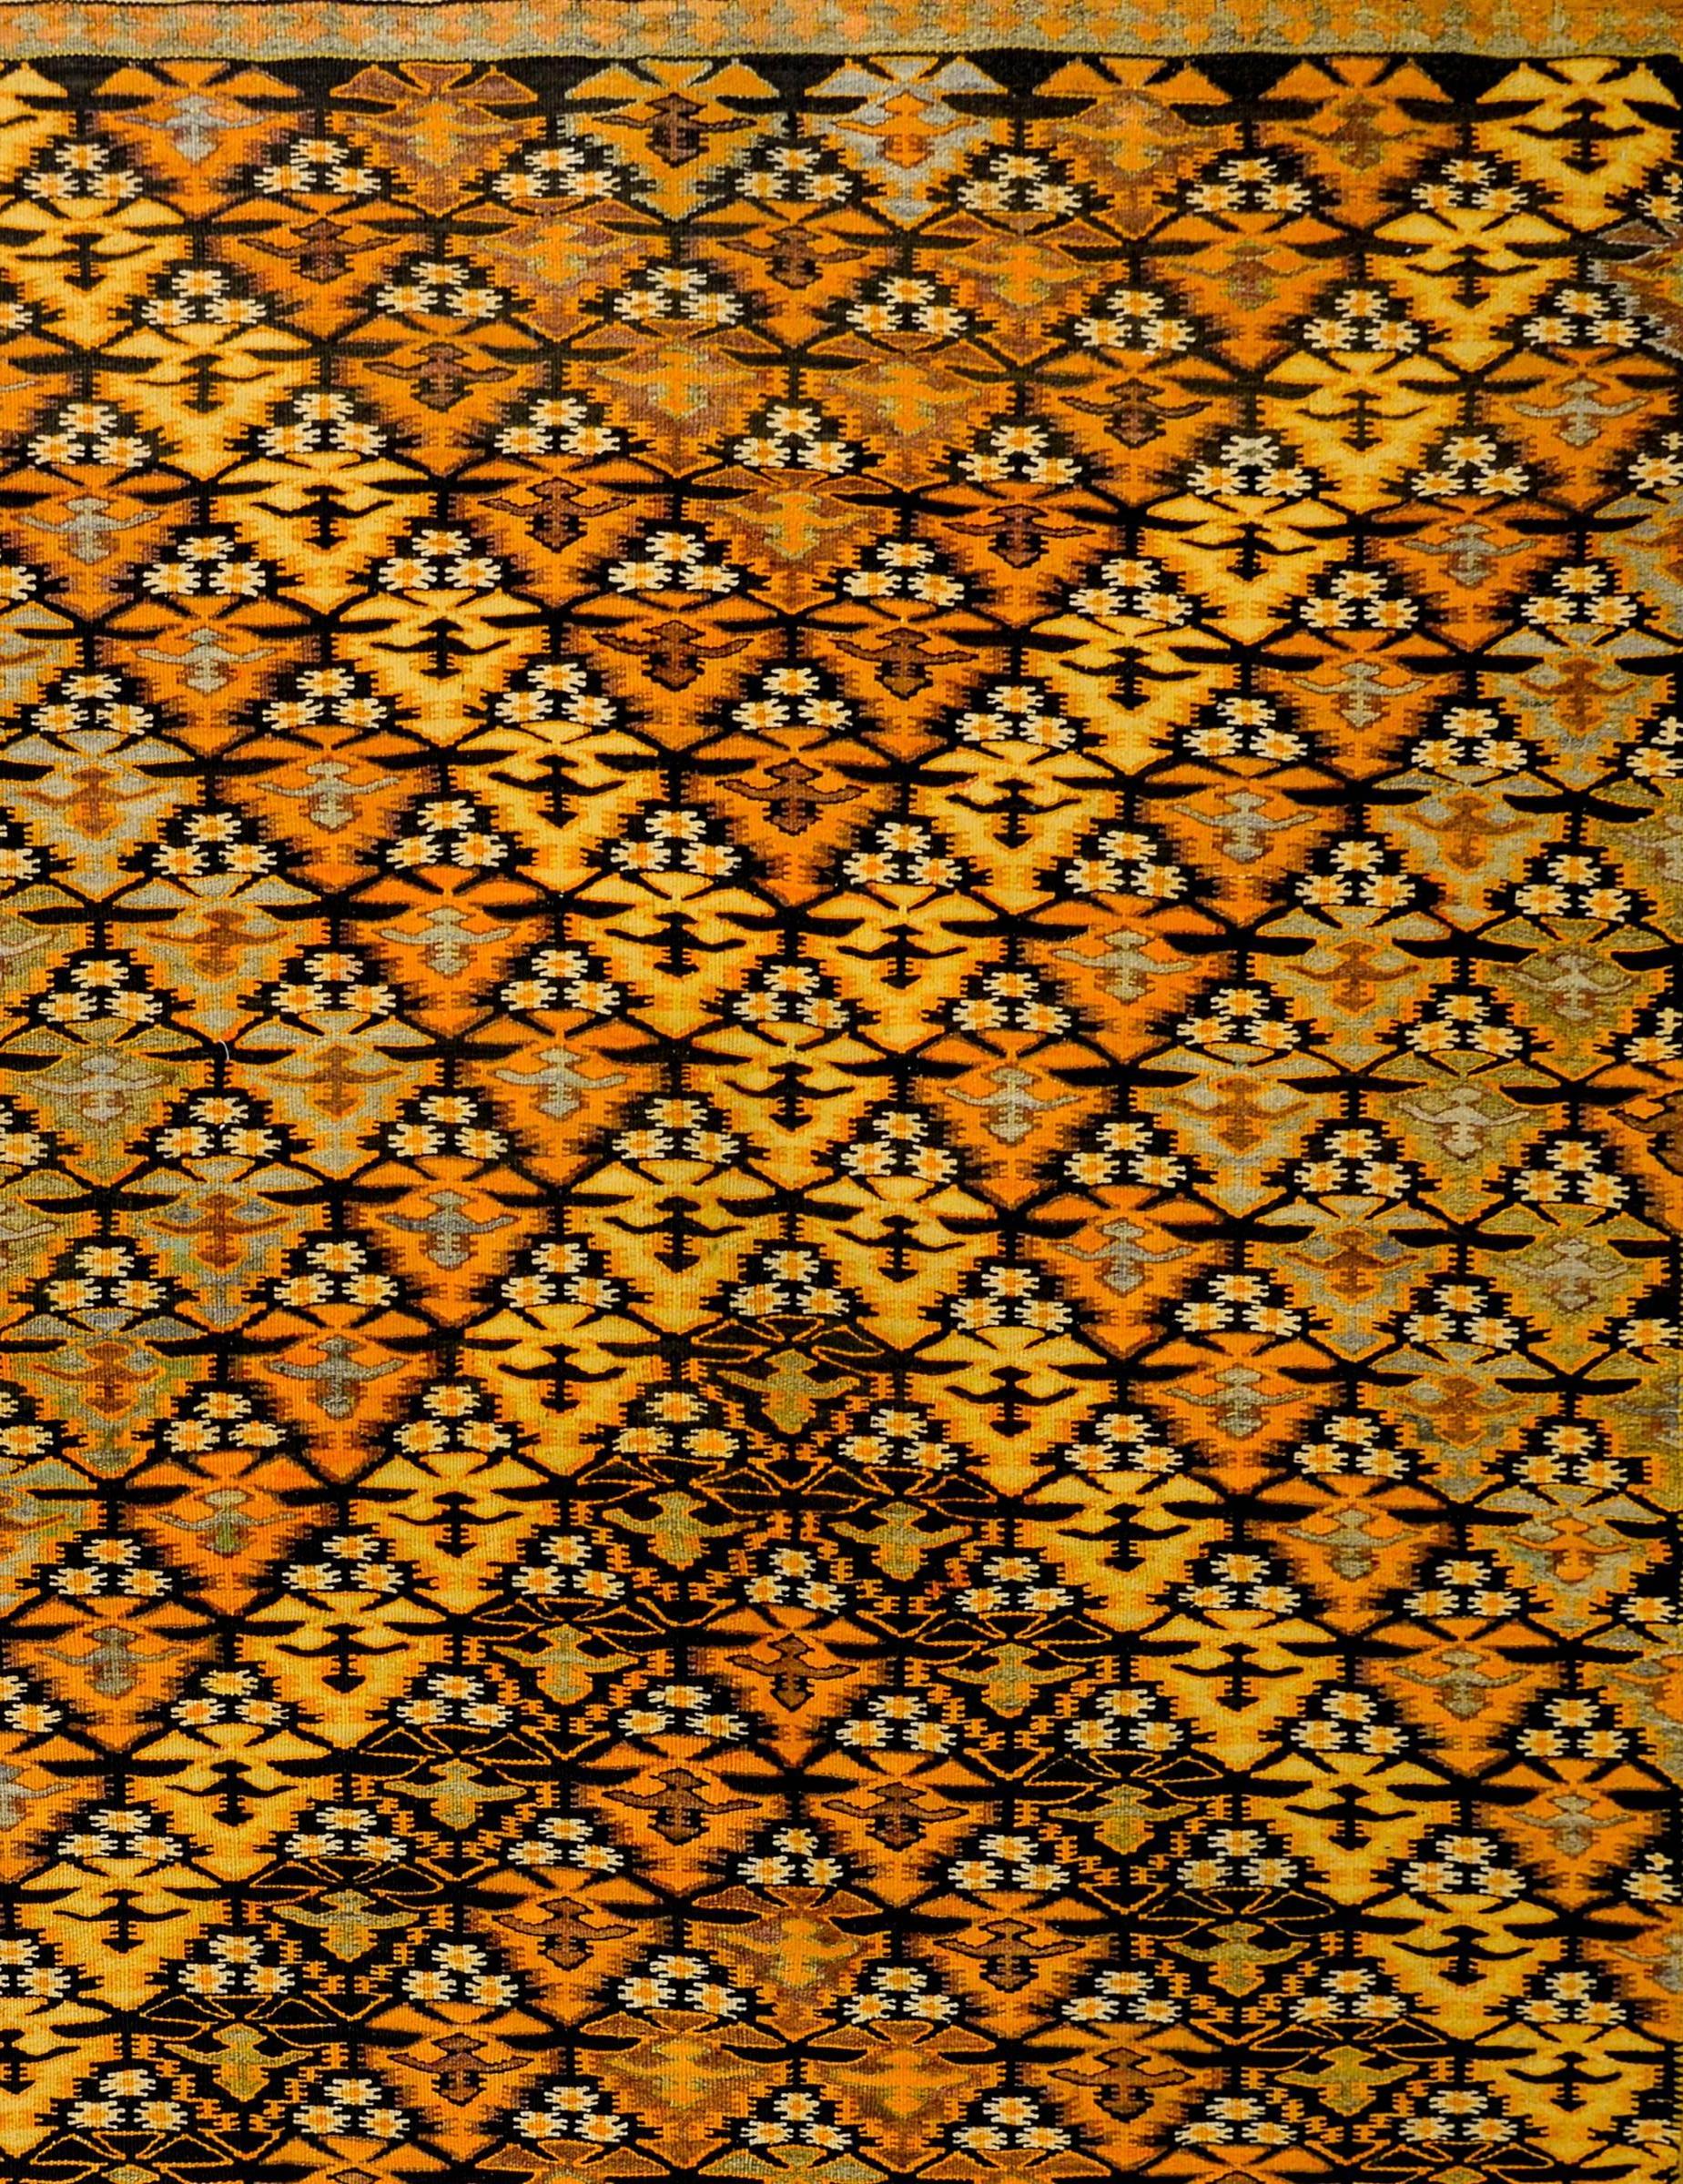 An amazing mid-20th century Persian Qazvin Kilim rug with an all-over tree-of-life pattern woven in such a way that a diamond pattern of orange, lilac and natural wool colored trees is created. The border is complex, with three distinct geometric